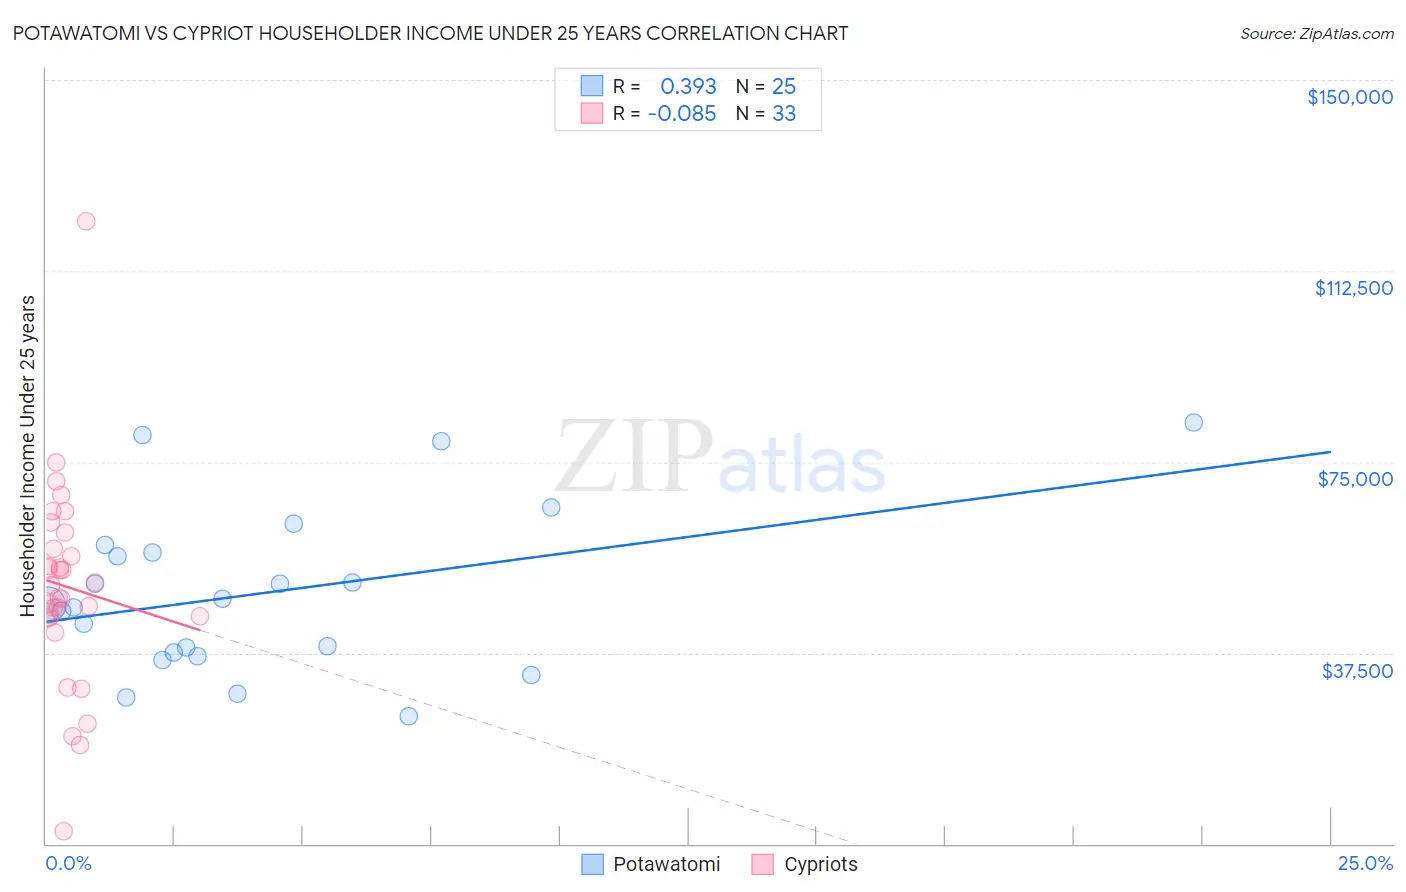 Potawatomi vs Cypriot Householder Income Under 25 years